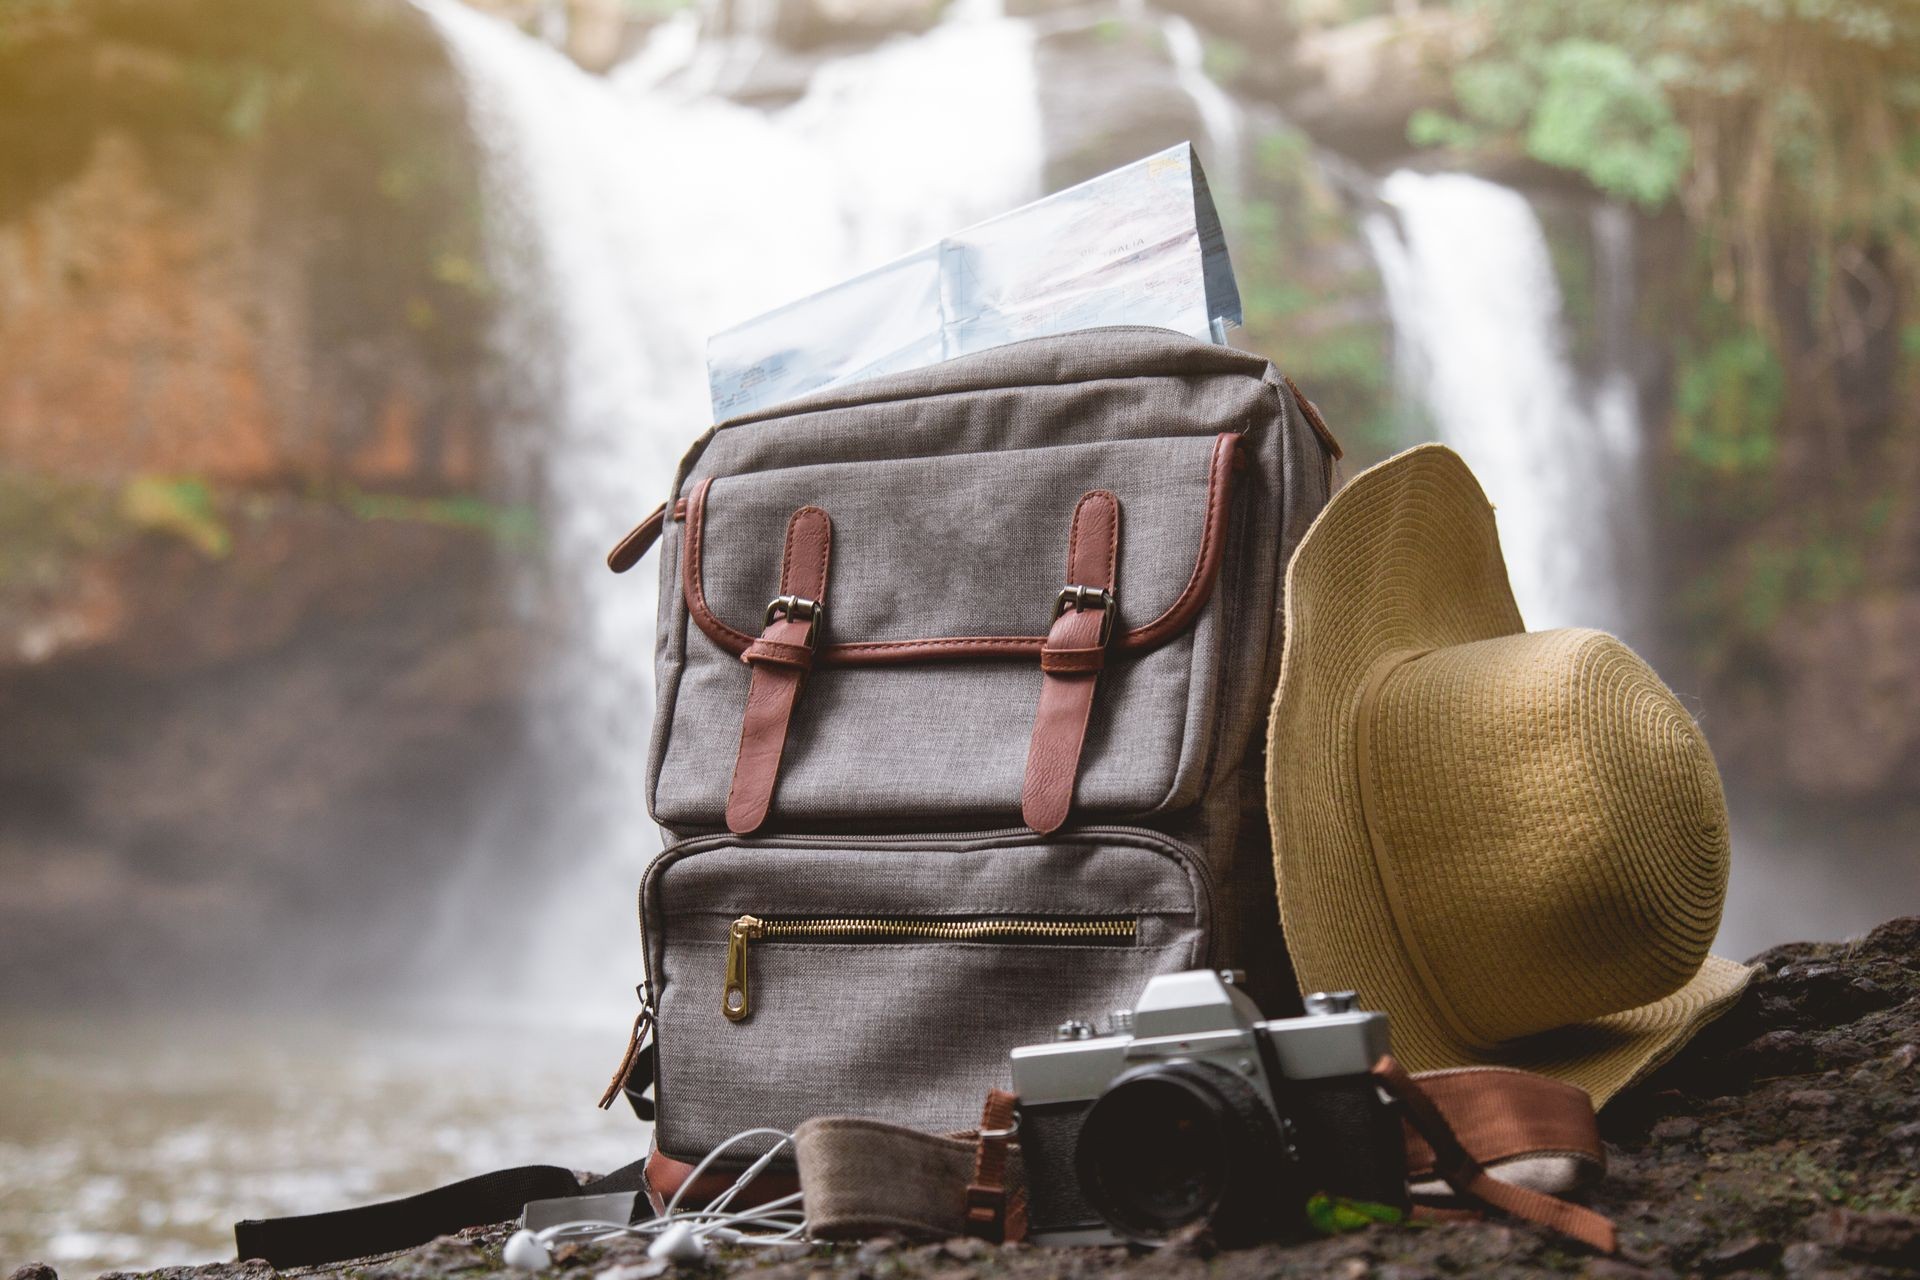 Map in Backpack vintage, Mobile phone with earphone, film camera and hat at amazing background waterfall and forest with a traveler at sunset. Travel and hipster concept.